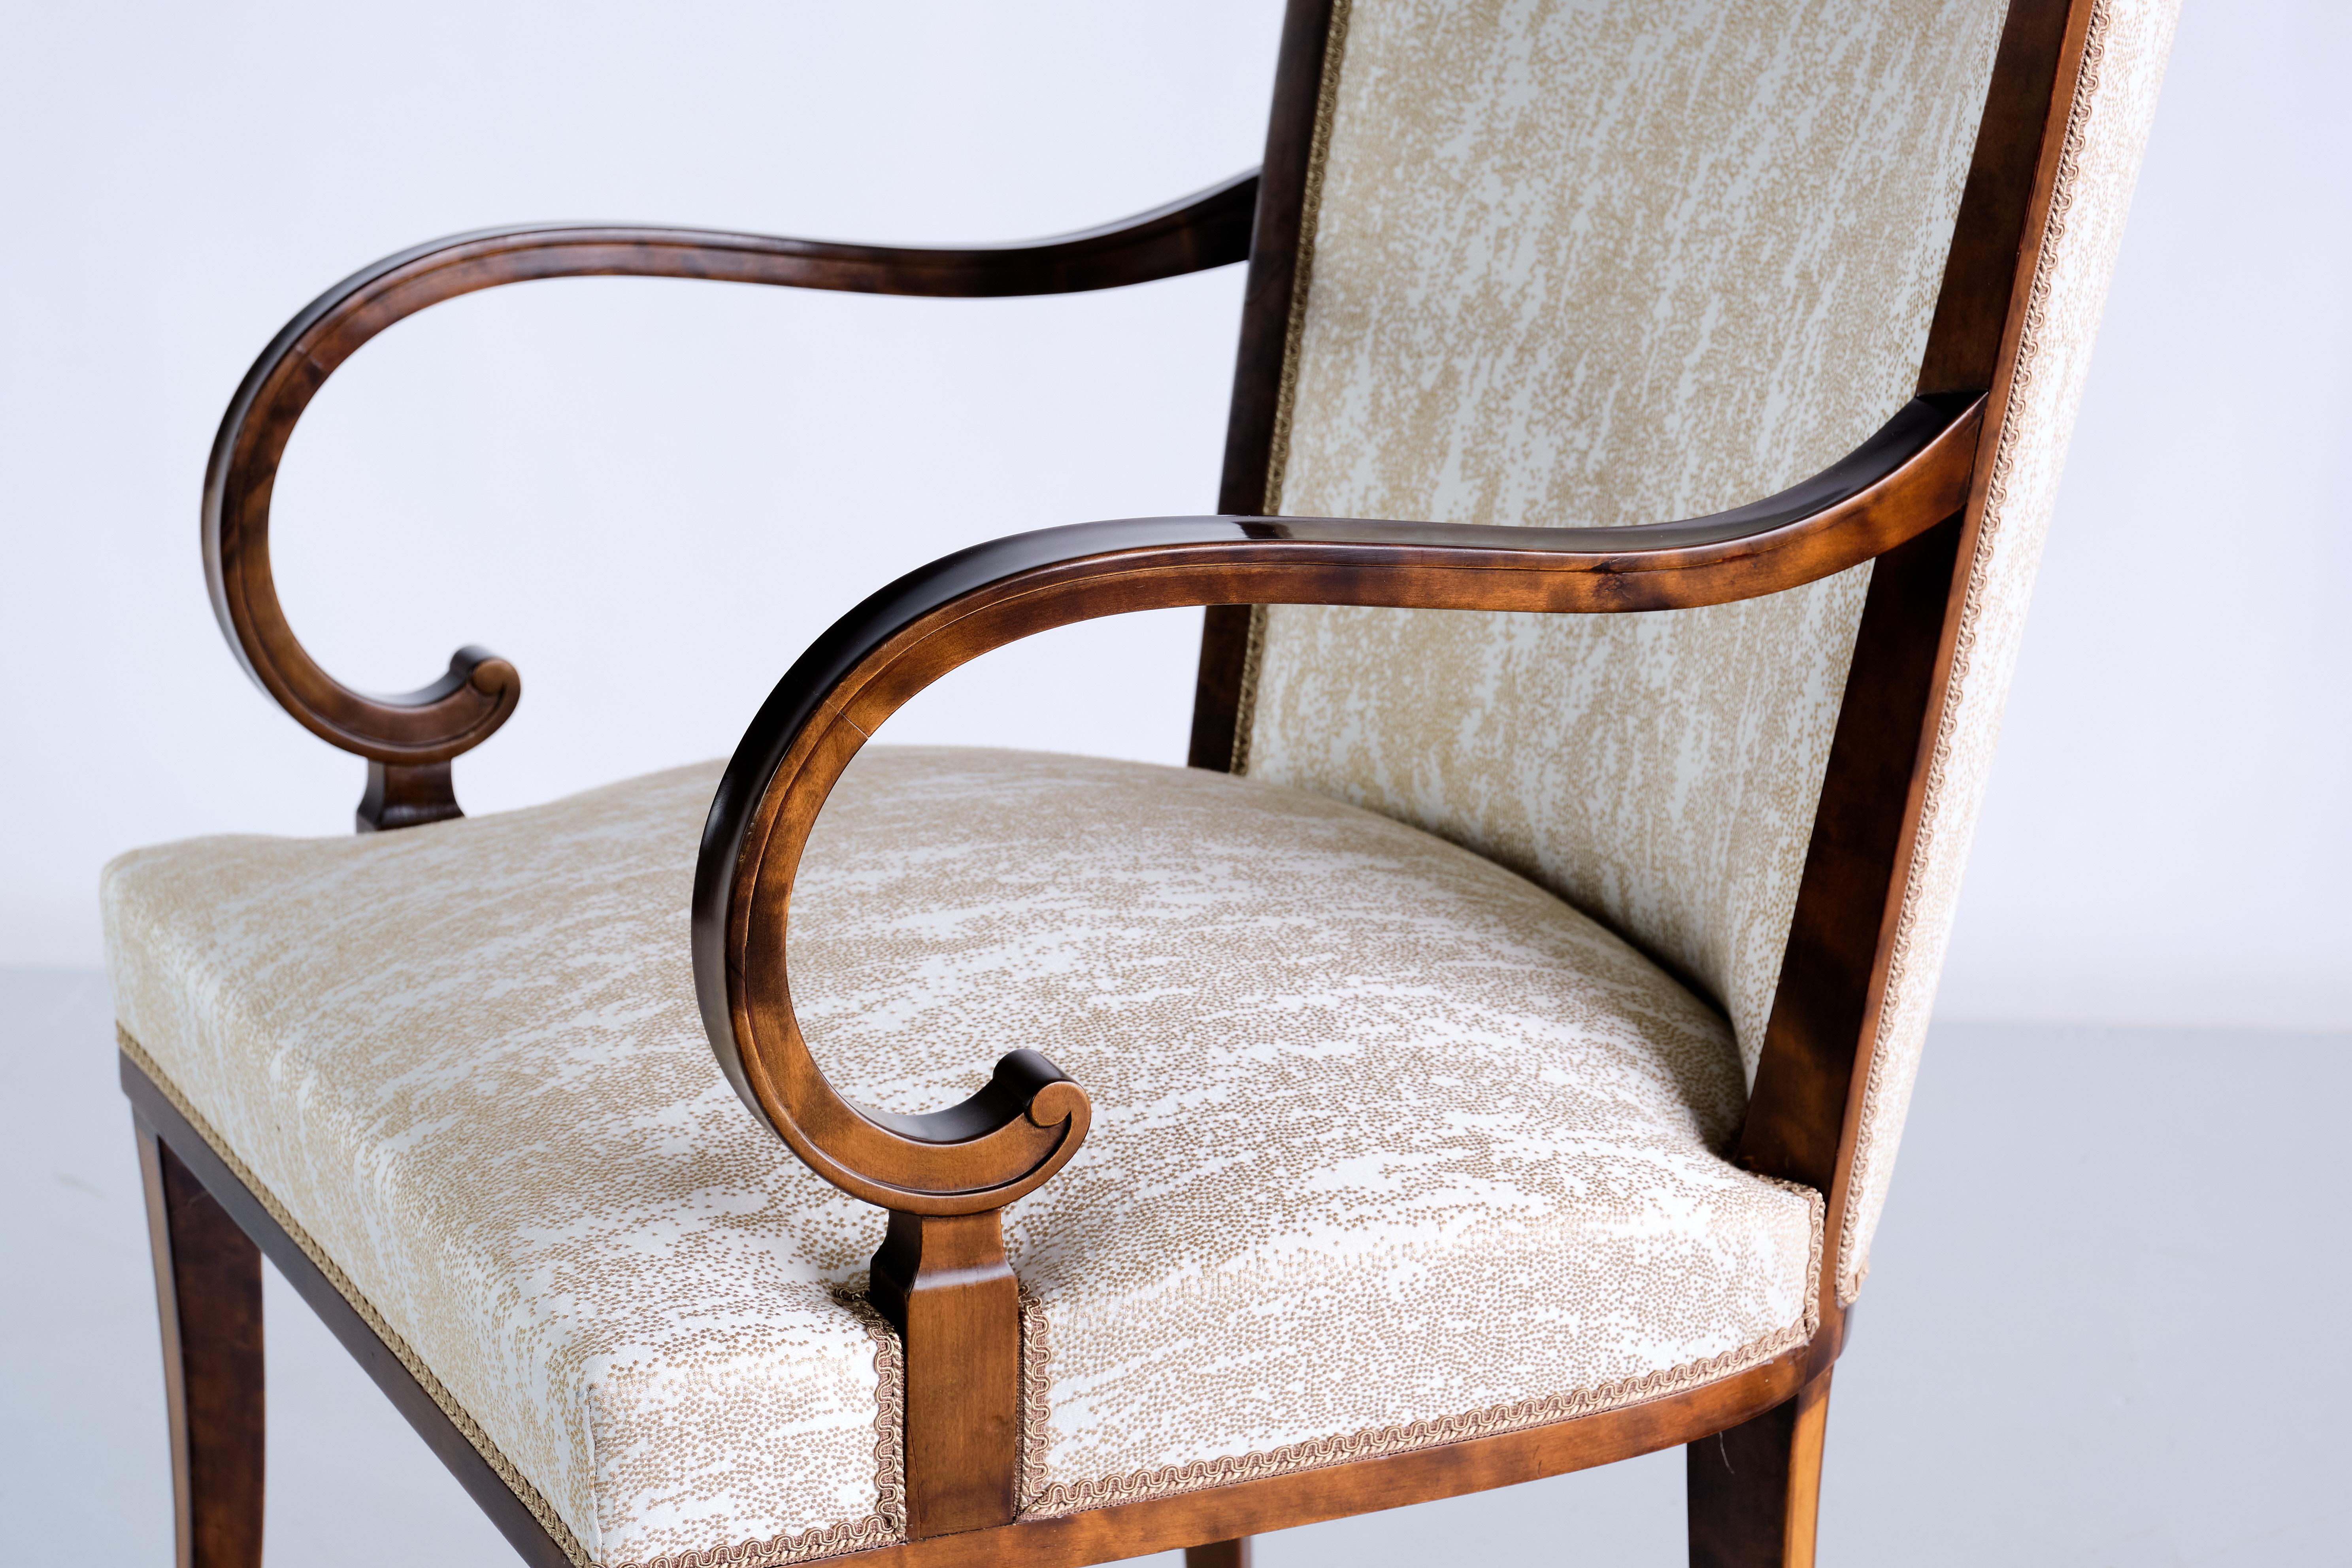 Pair of Carl Malmsten Armchairs in Birch and Satinwood, Bodafors, Sweden, 1930s For Sale 7